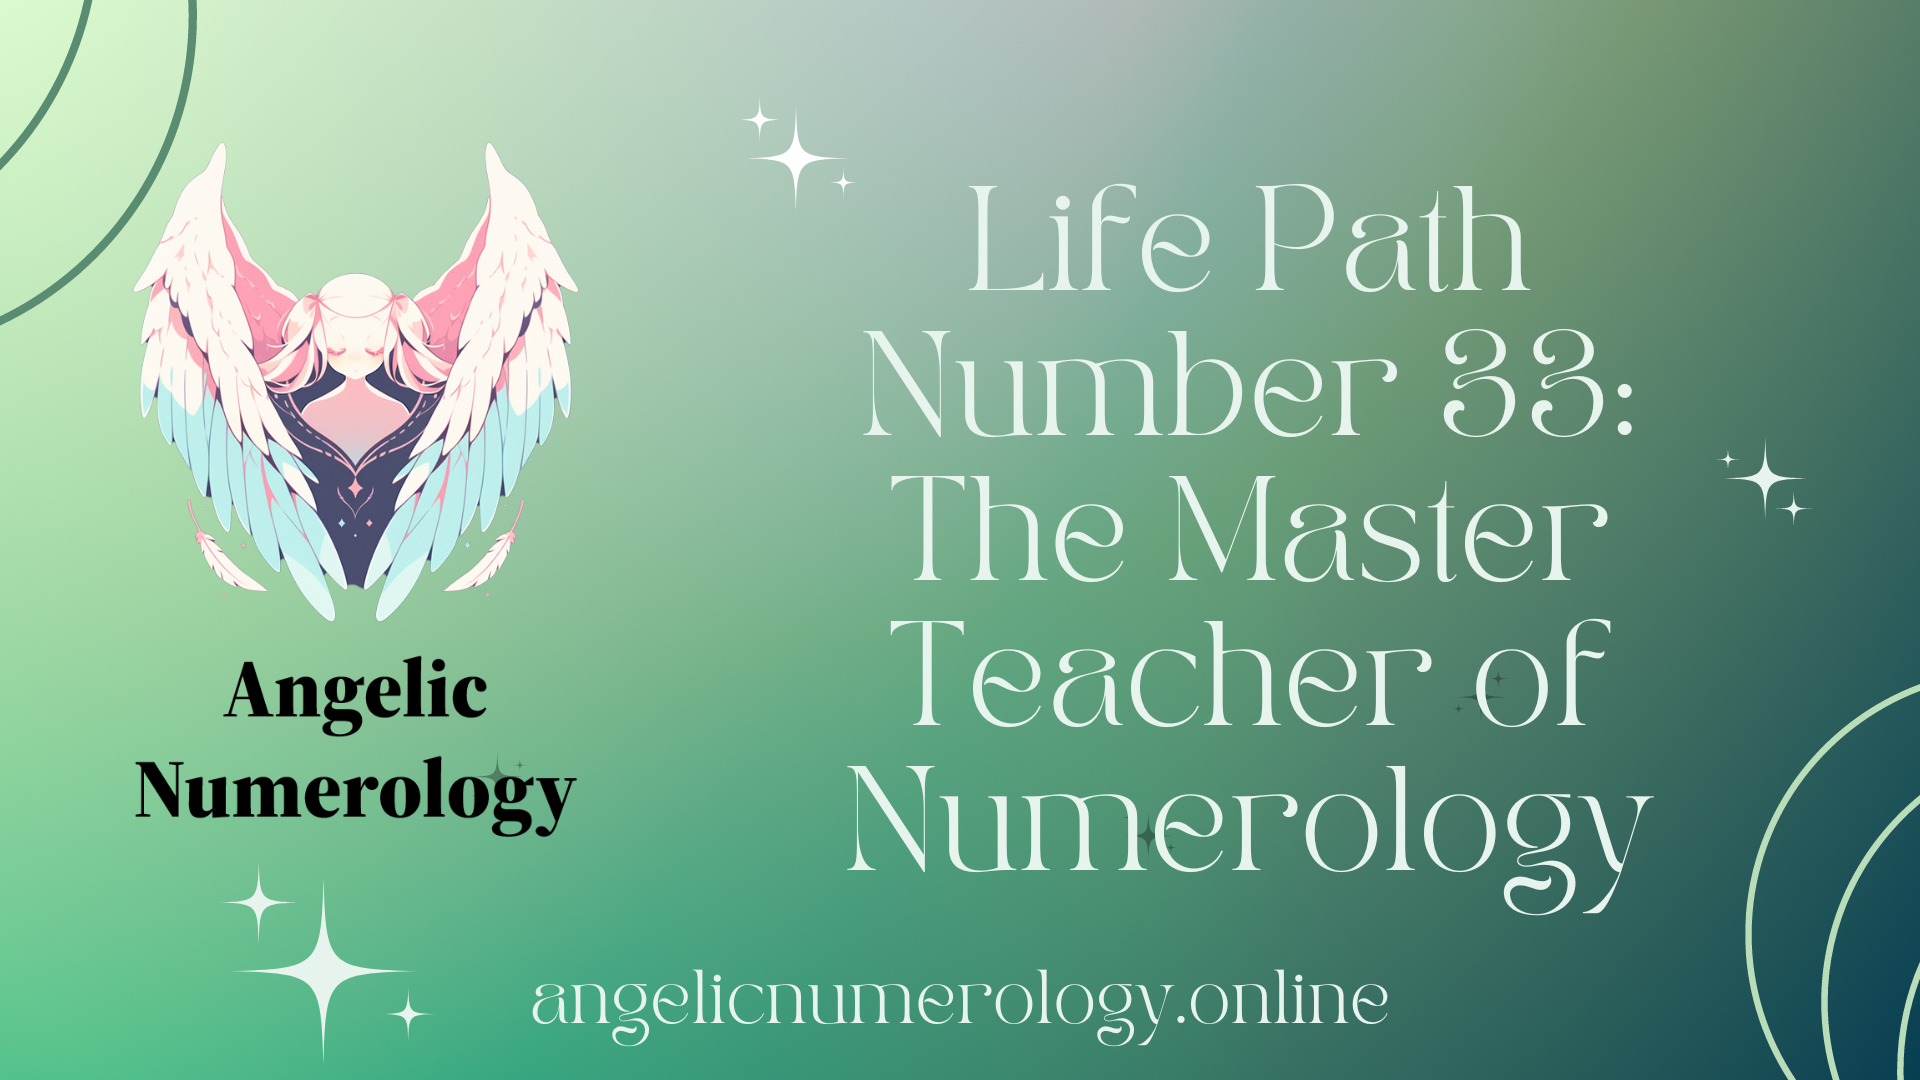 Life Path Number 33: The Master Teacher of Numerology